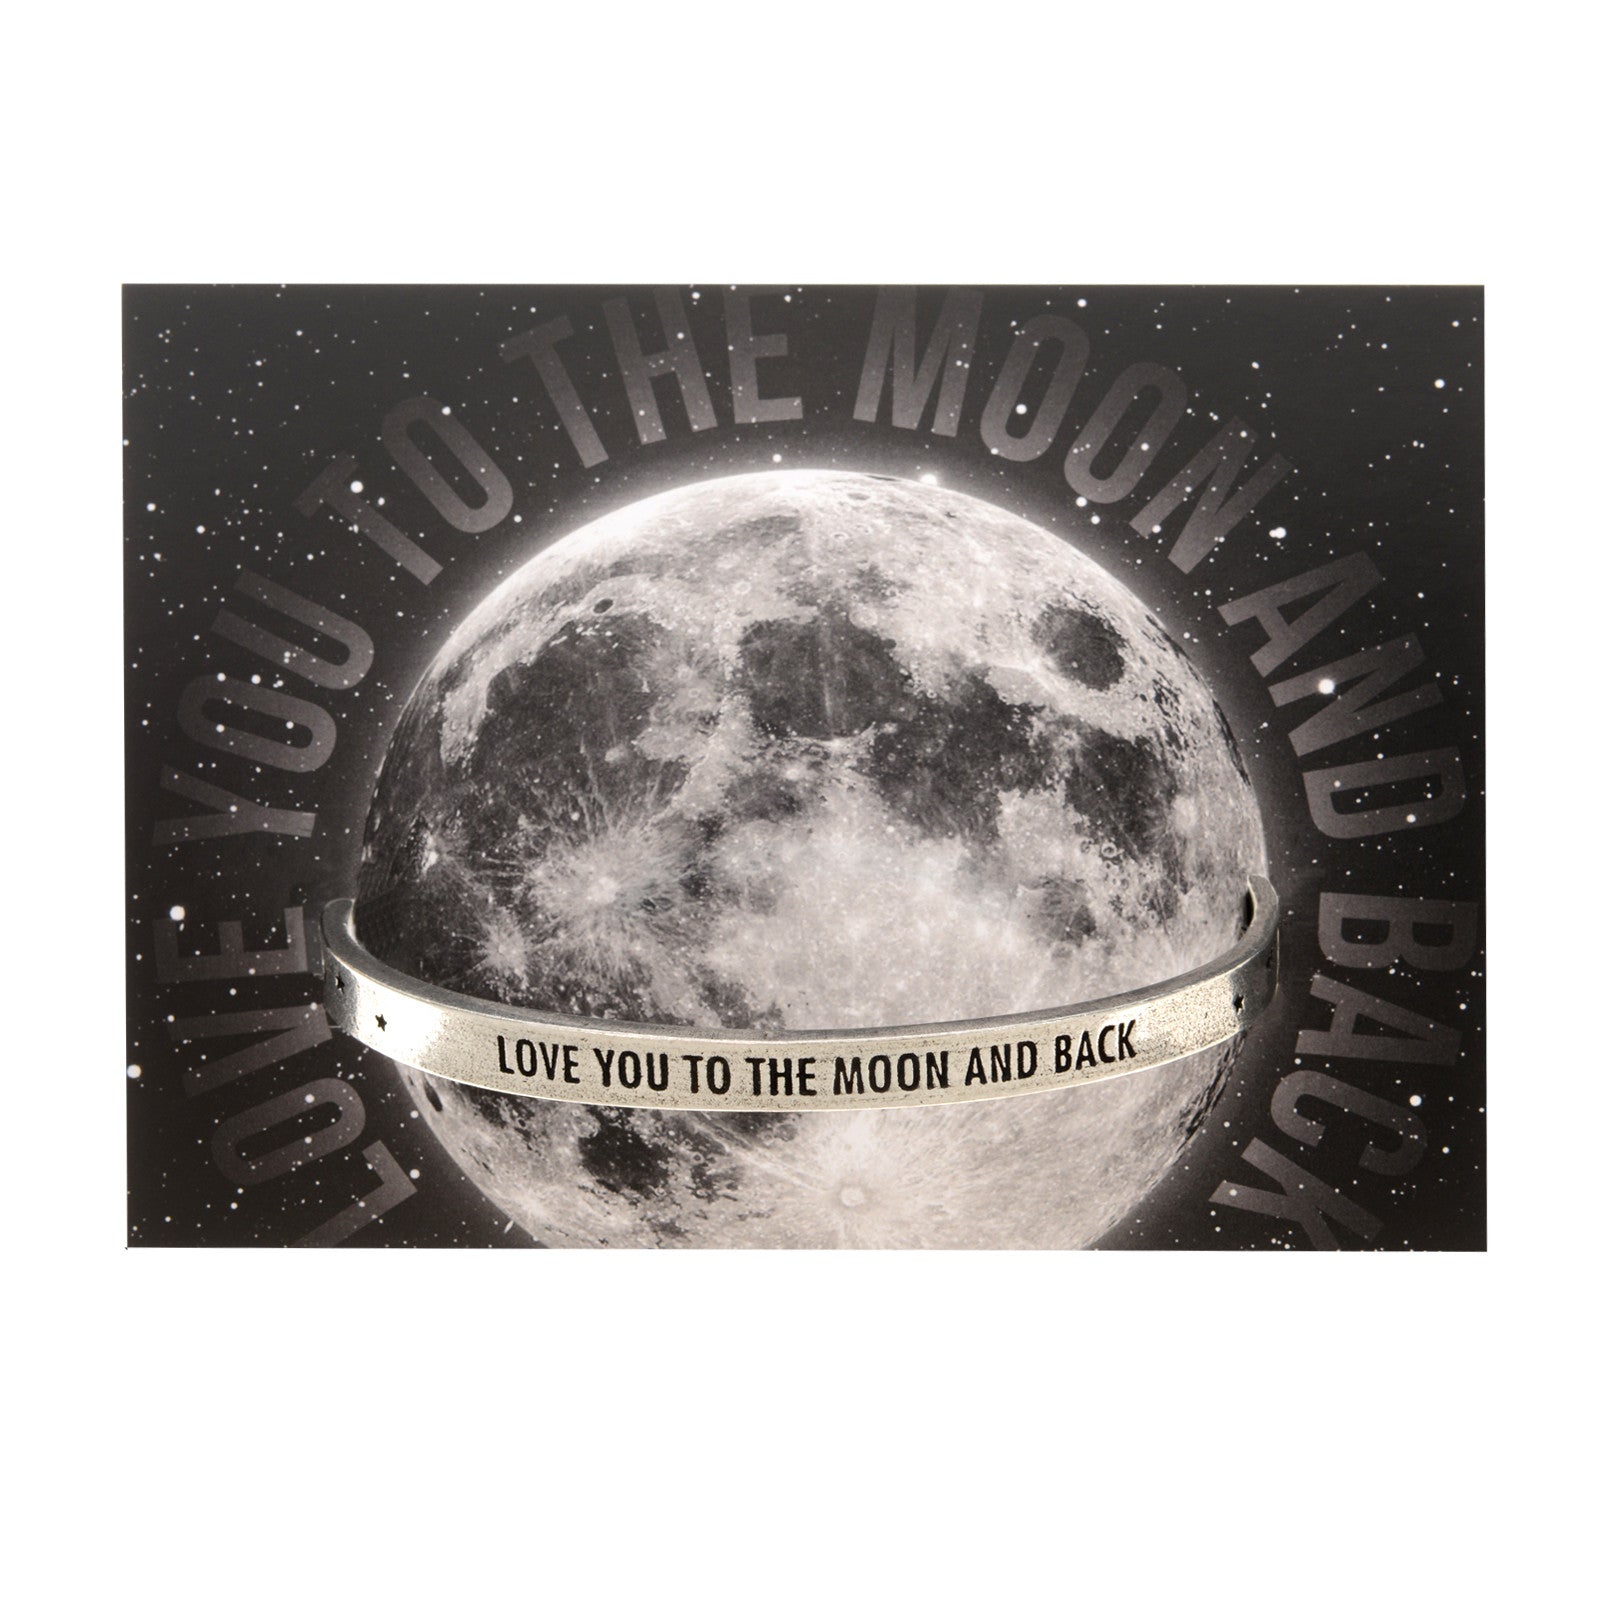 Love You to the Moon and Back Quotable Cuff Bracelet on backer card